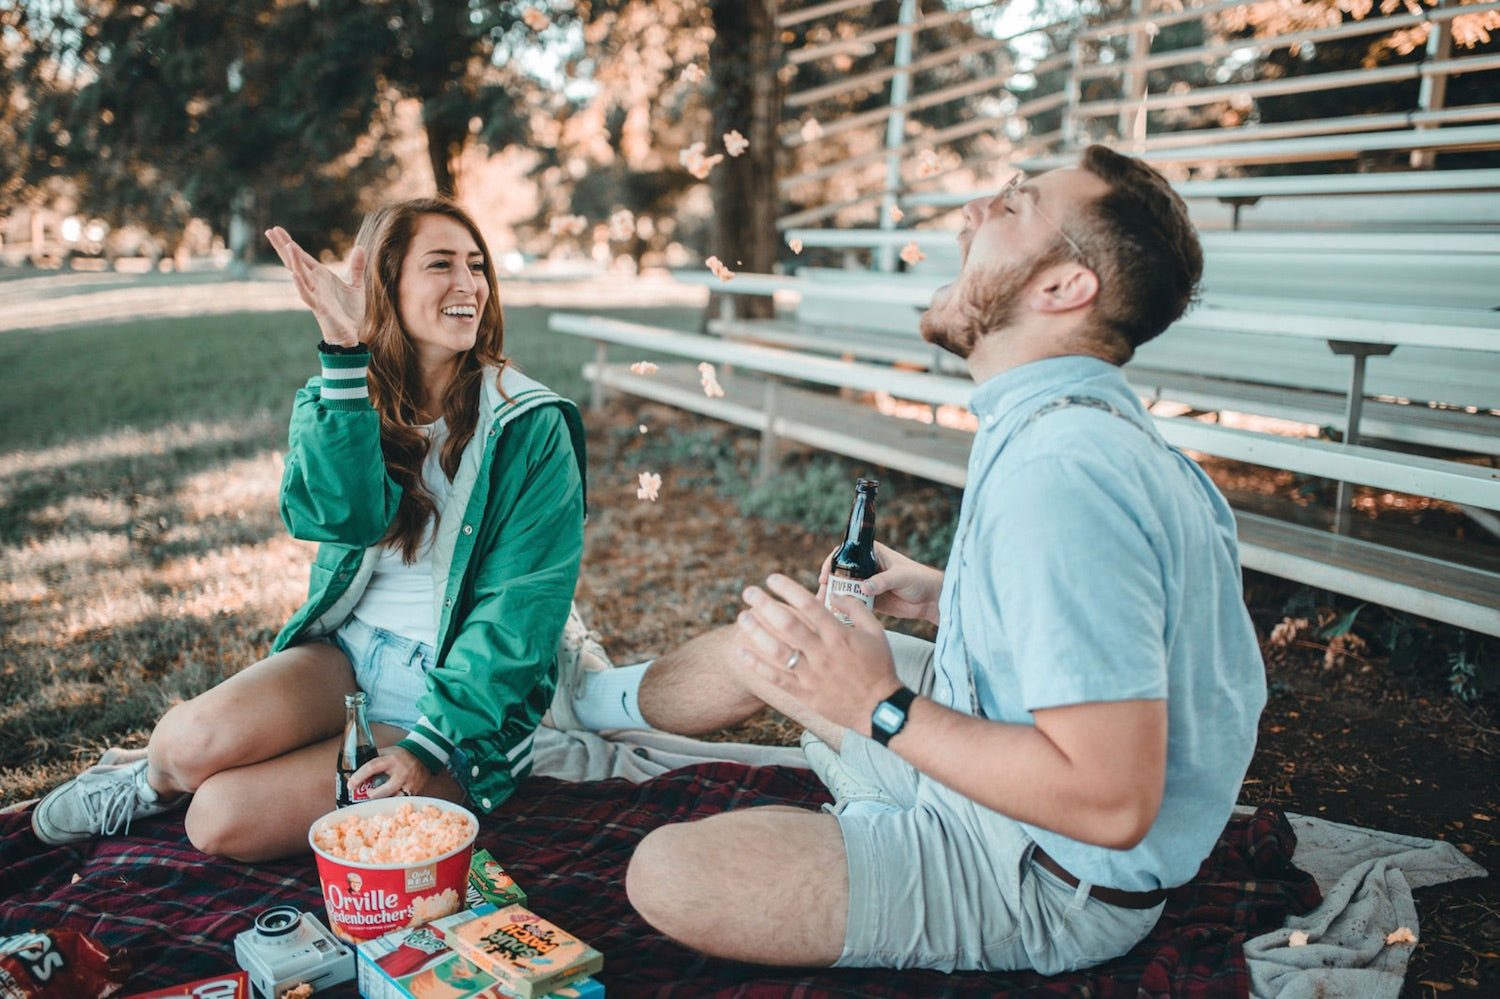 An image of a girl throwing snacks into her boyfriends mouth as they have a picnic together.